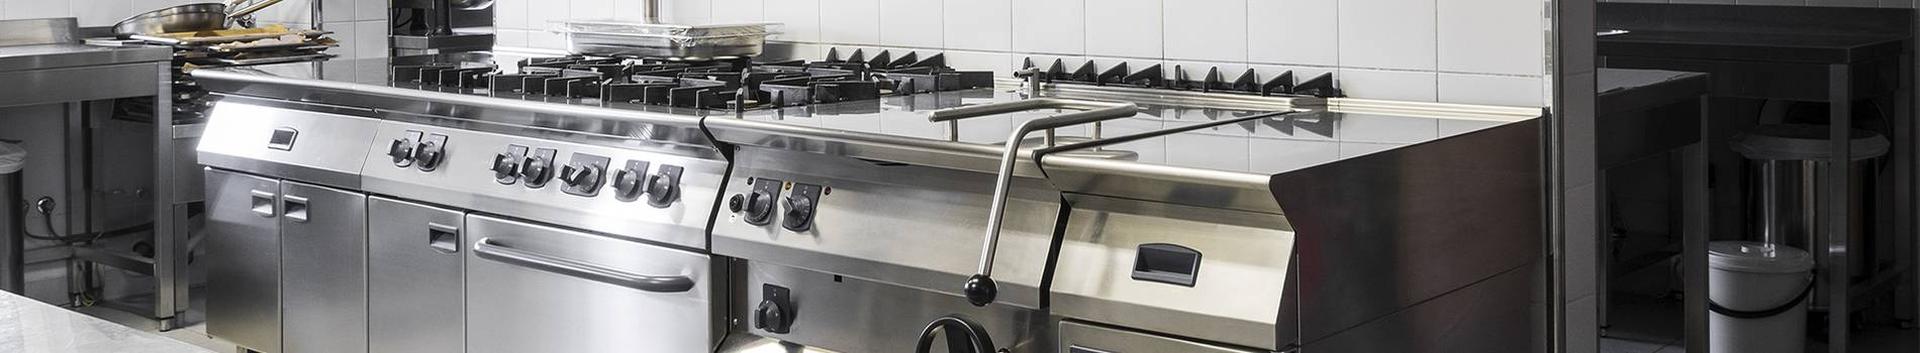 Catering equipment, Large kitchen furnishings, Miscellaneous equipment, Vacuum cleaners, Washing machines and dryers, Furniture, School furniture, cooling and air conditioning systems, heat pumps, Diner furnishings, Meals